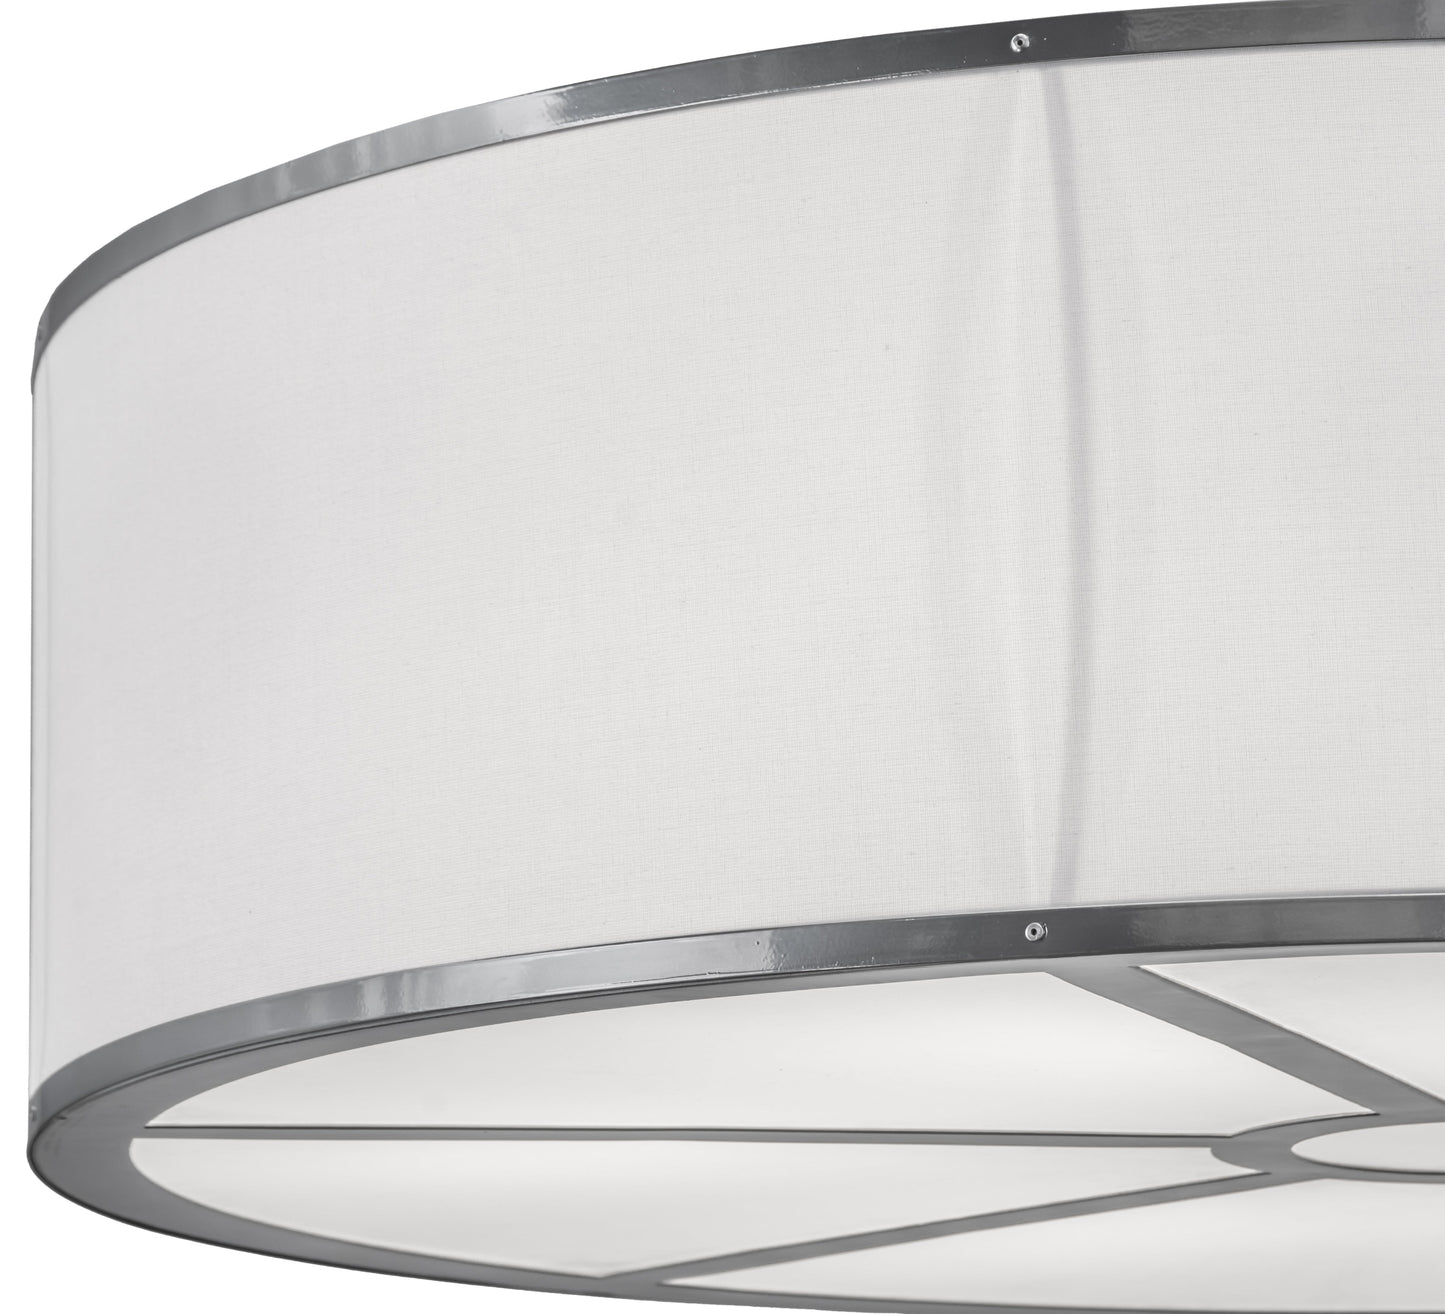 36" Cilindro White Textrene Flushmount by 2nd Ave Lighting